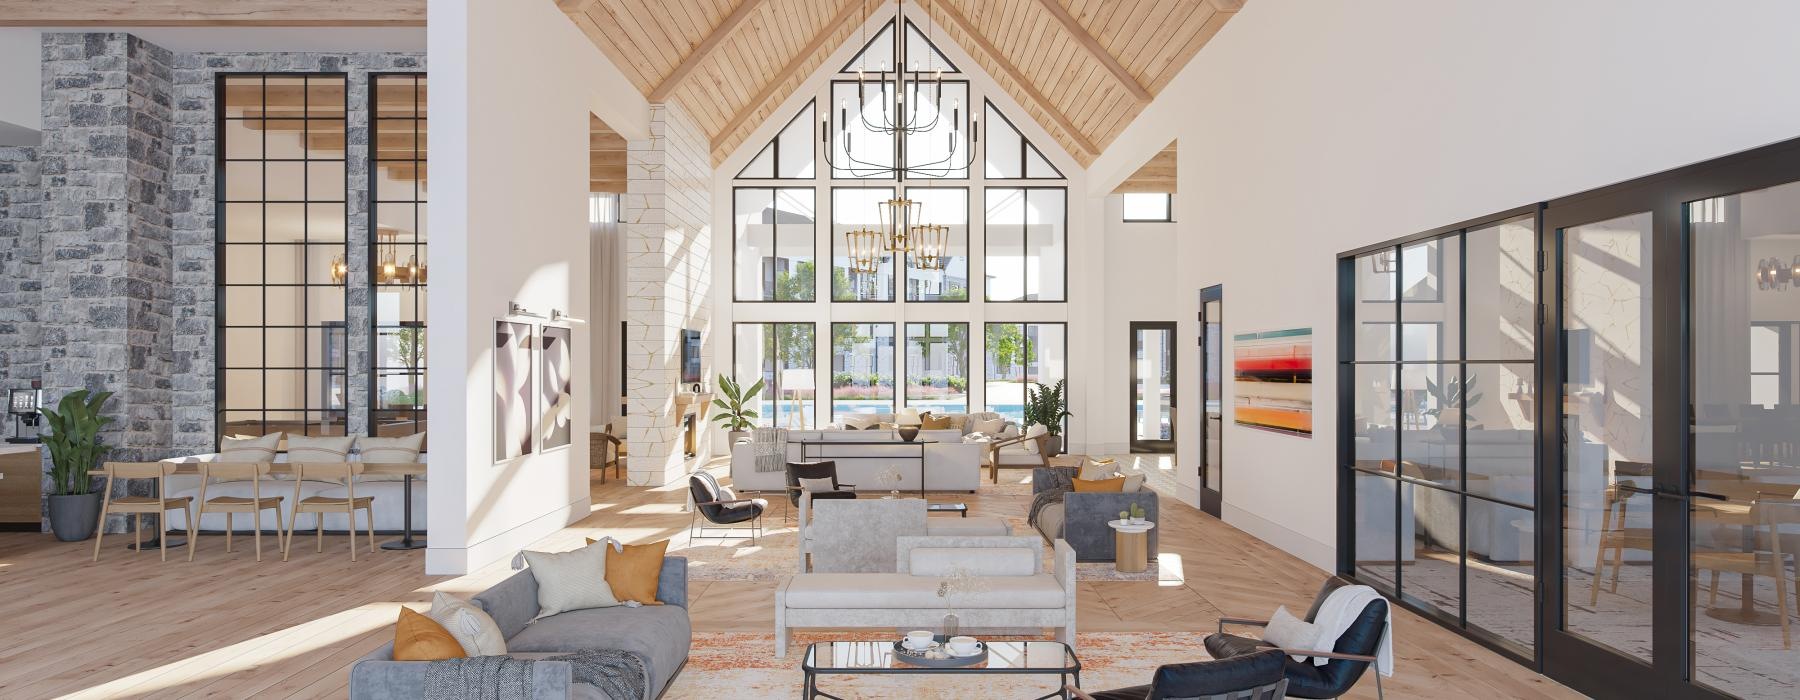 spacious clubhouse with vaulted ceilings and many windows